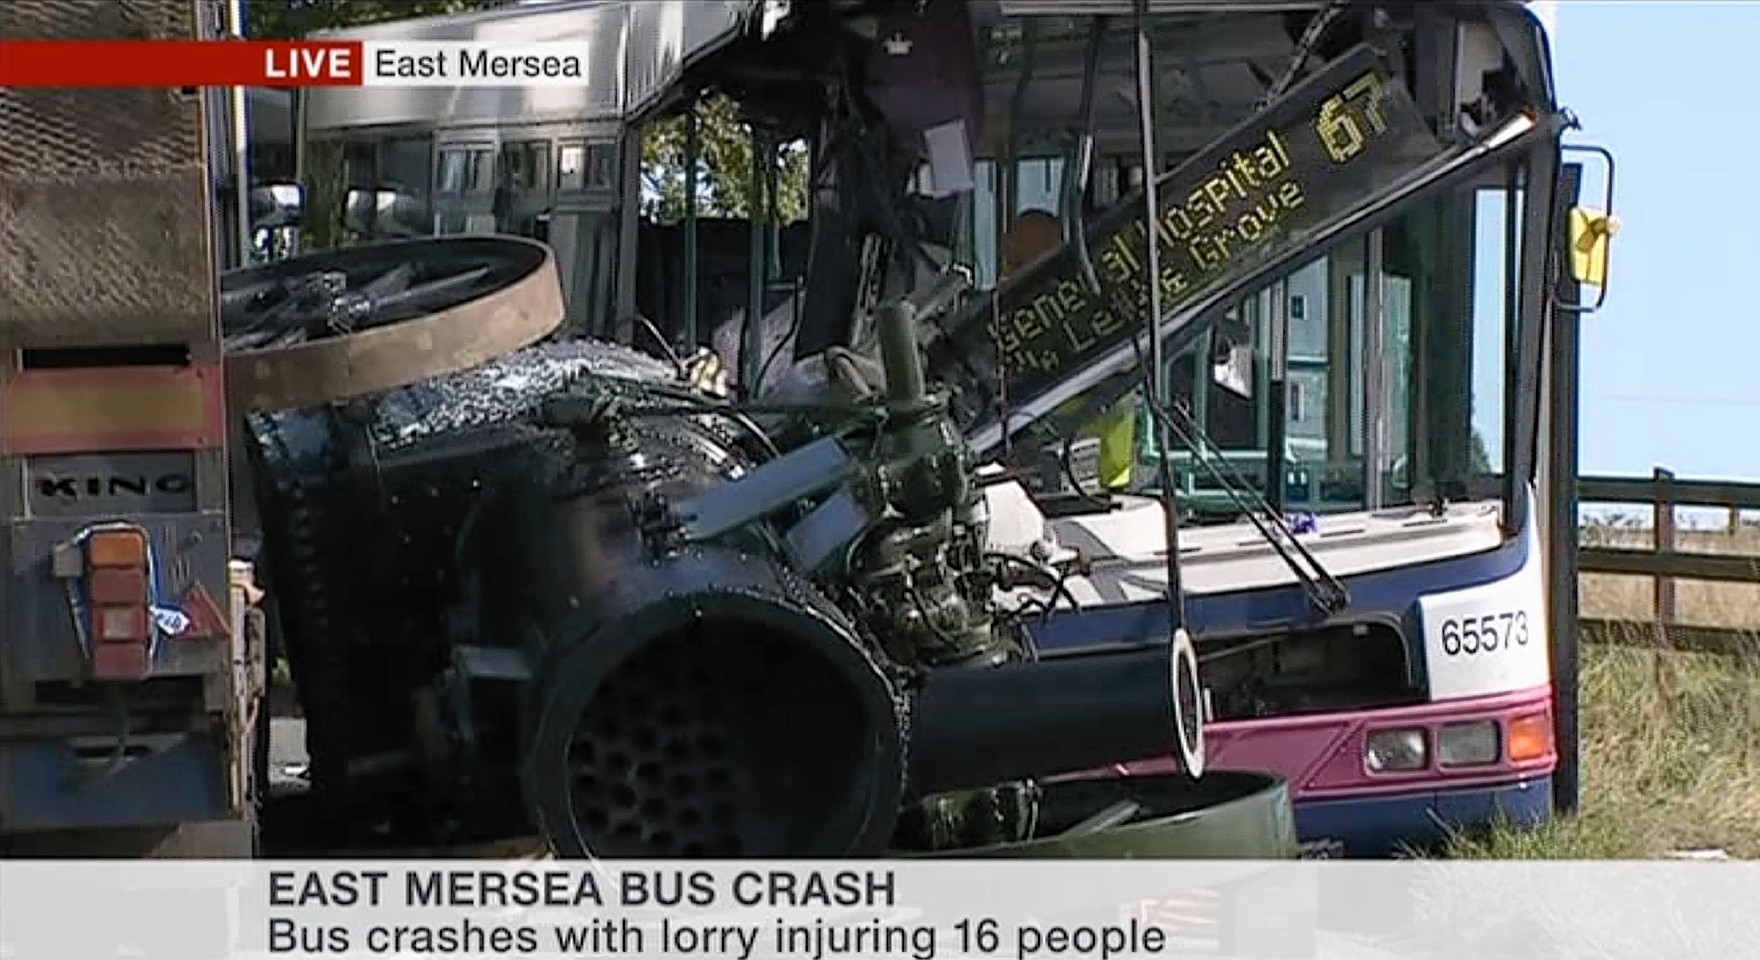 Local TV image after a lorry carrying a steam engine hits a bus 